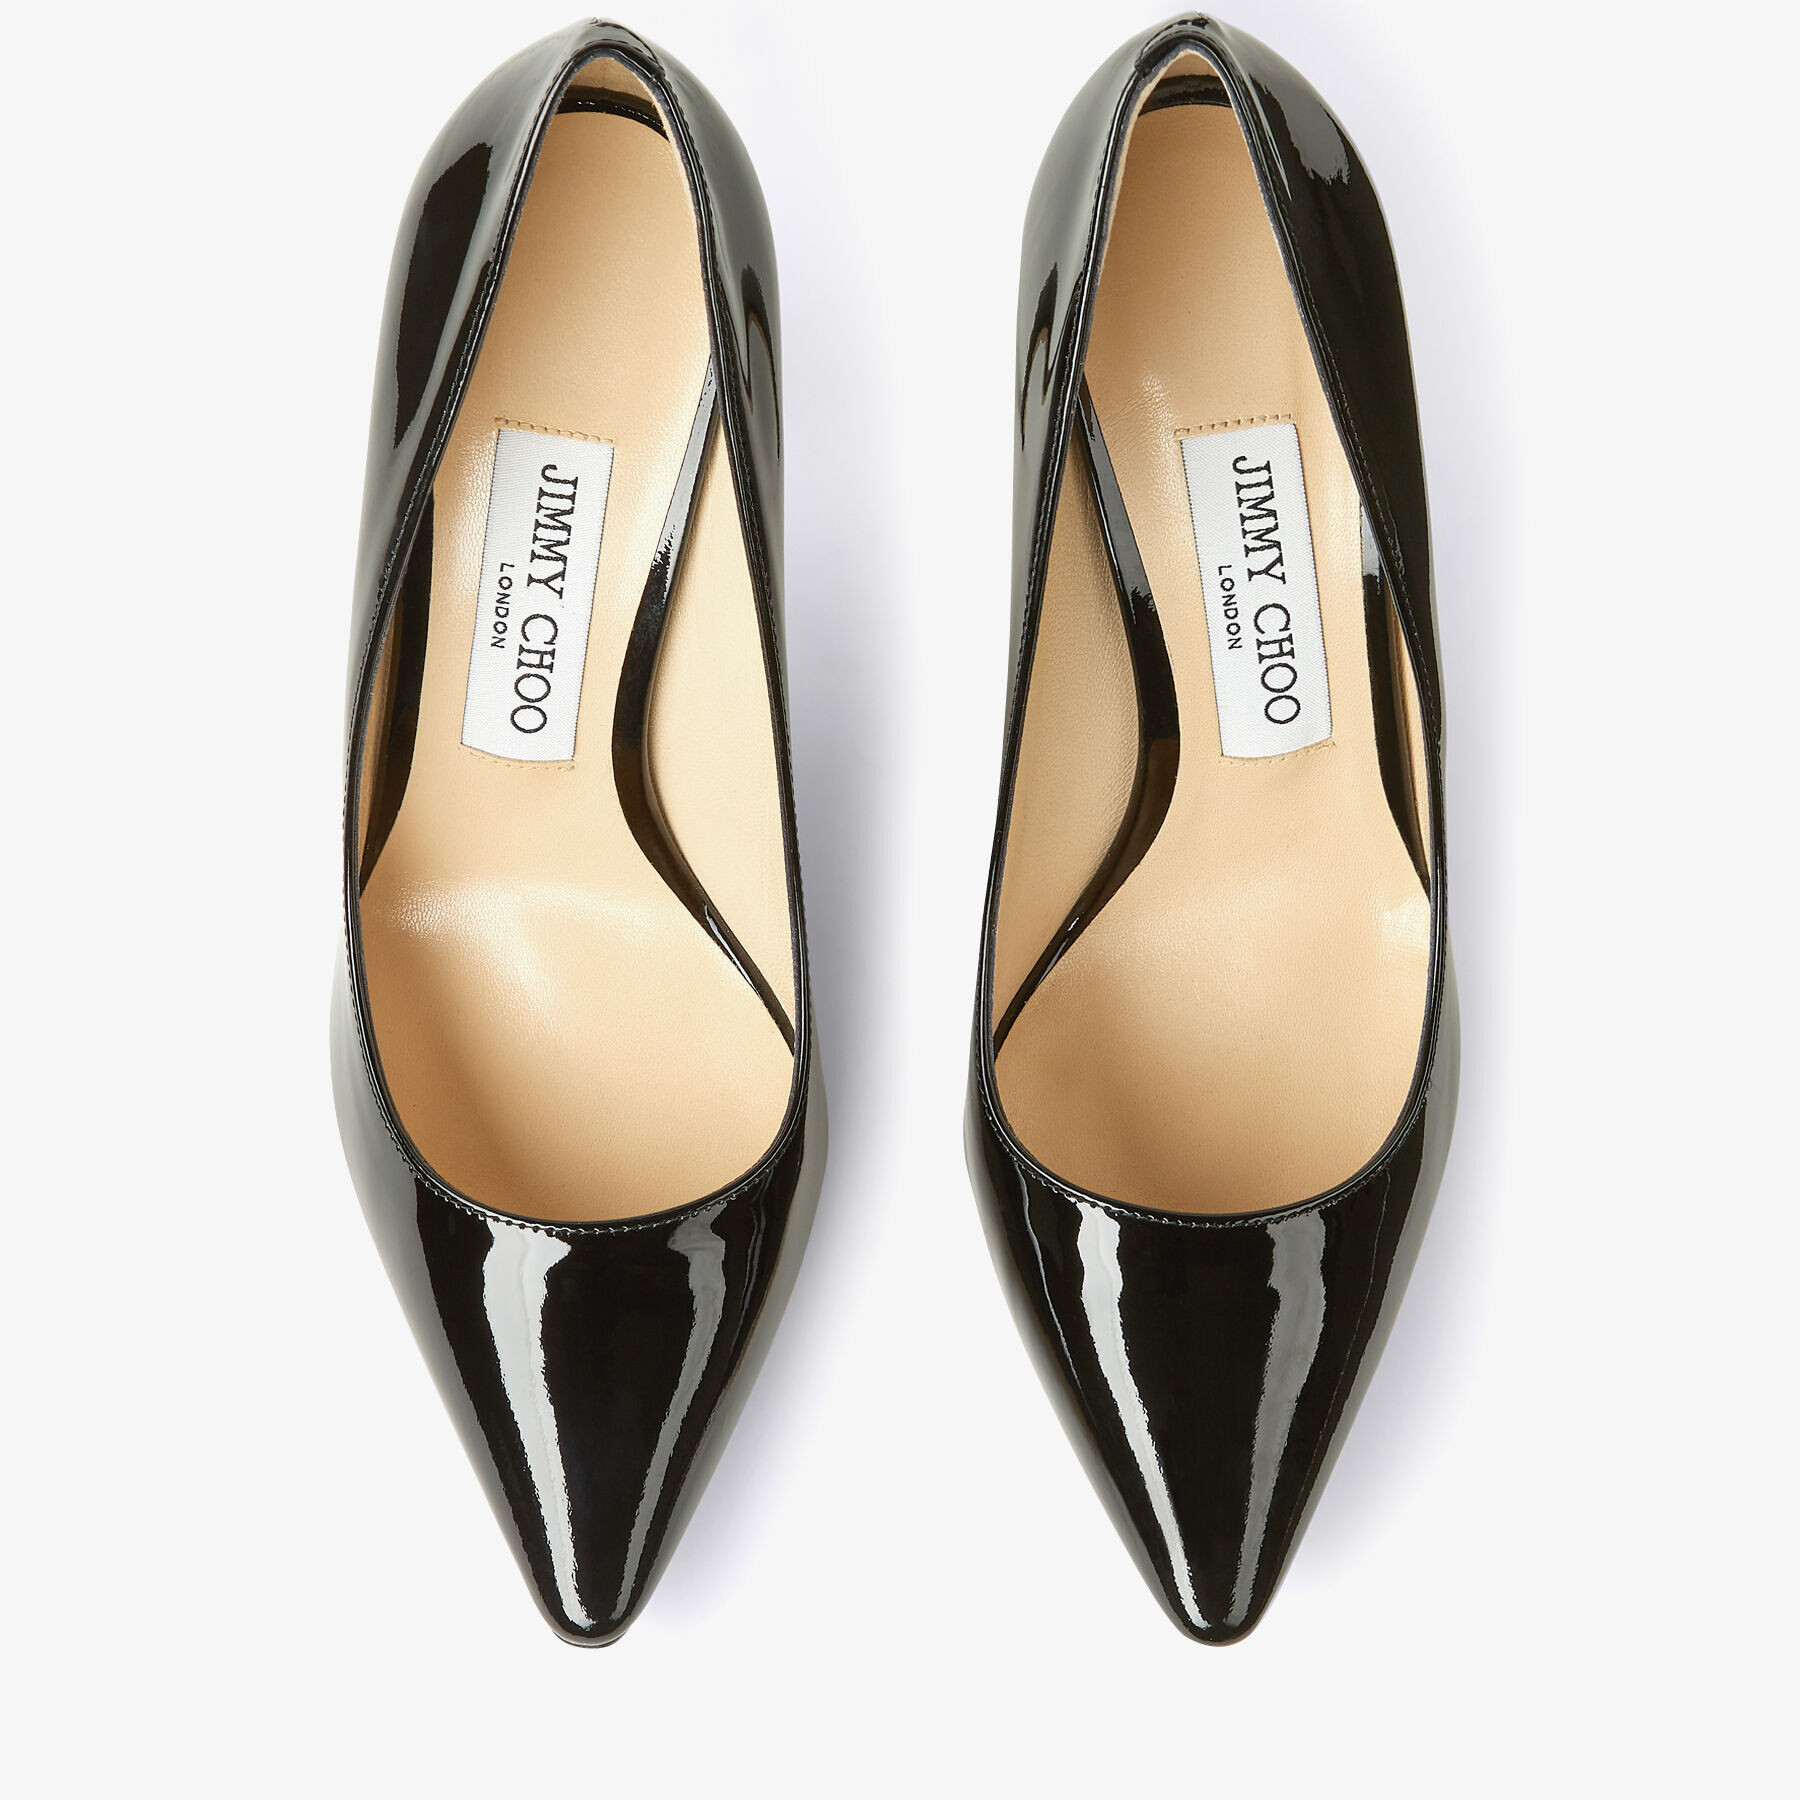 Black Patent Leather Pointy Toe Pumps | Romy 100 | Pre Fall 16 | JIMMY CHOO